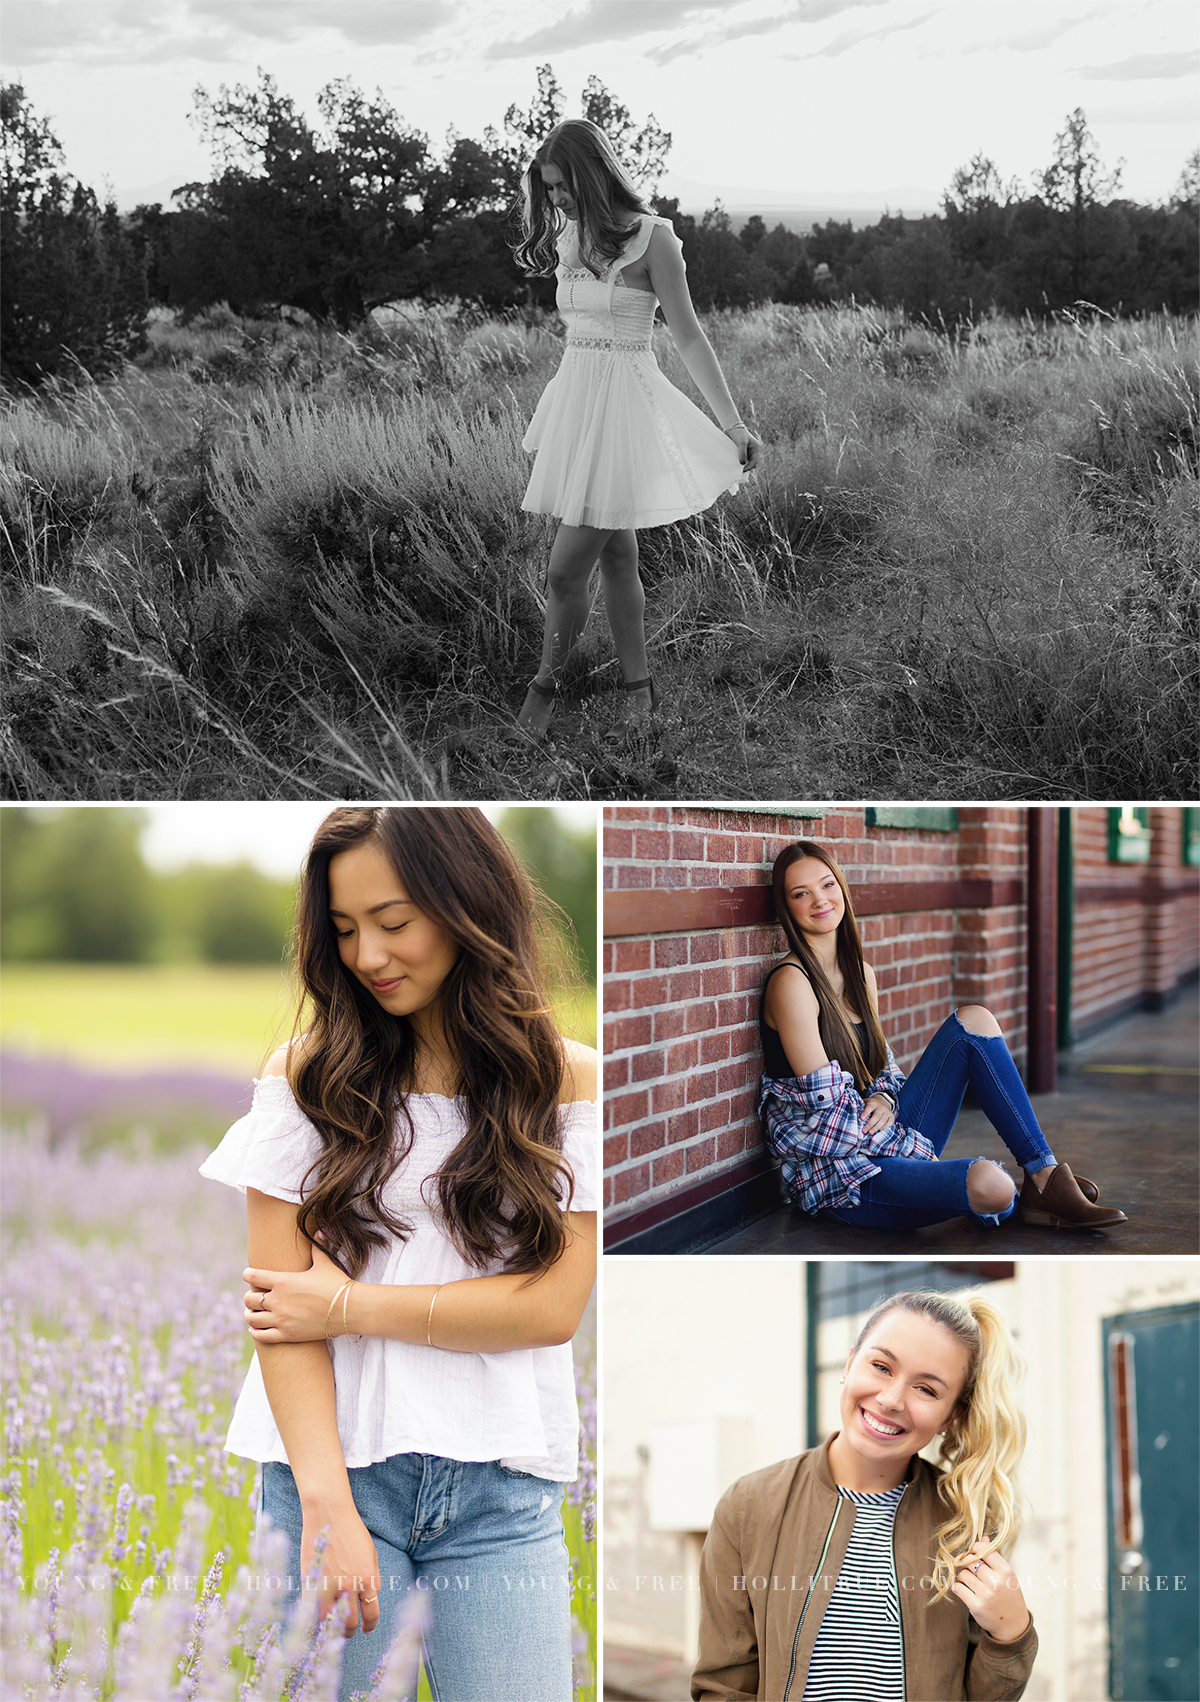 Team 22 Model Crew | Class of 2022 Senior Model Search | Holli True Photography | Oregon Senior Portrait Photographer for the Young & Free